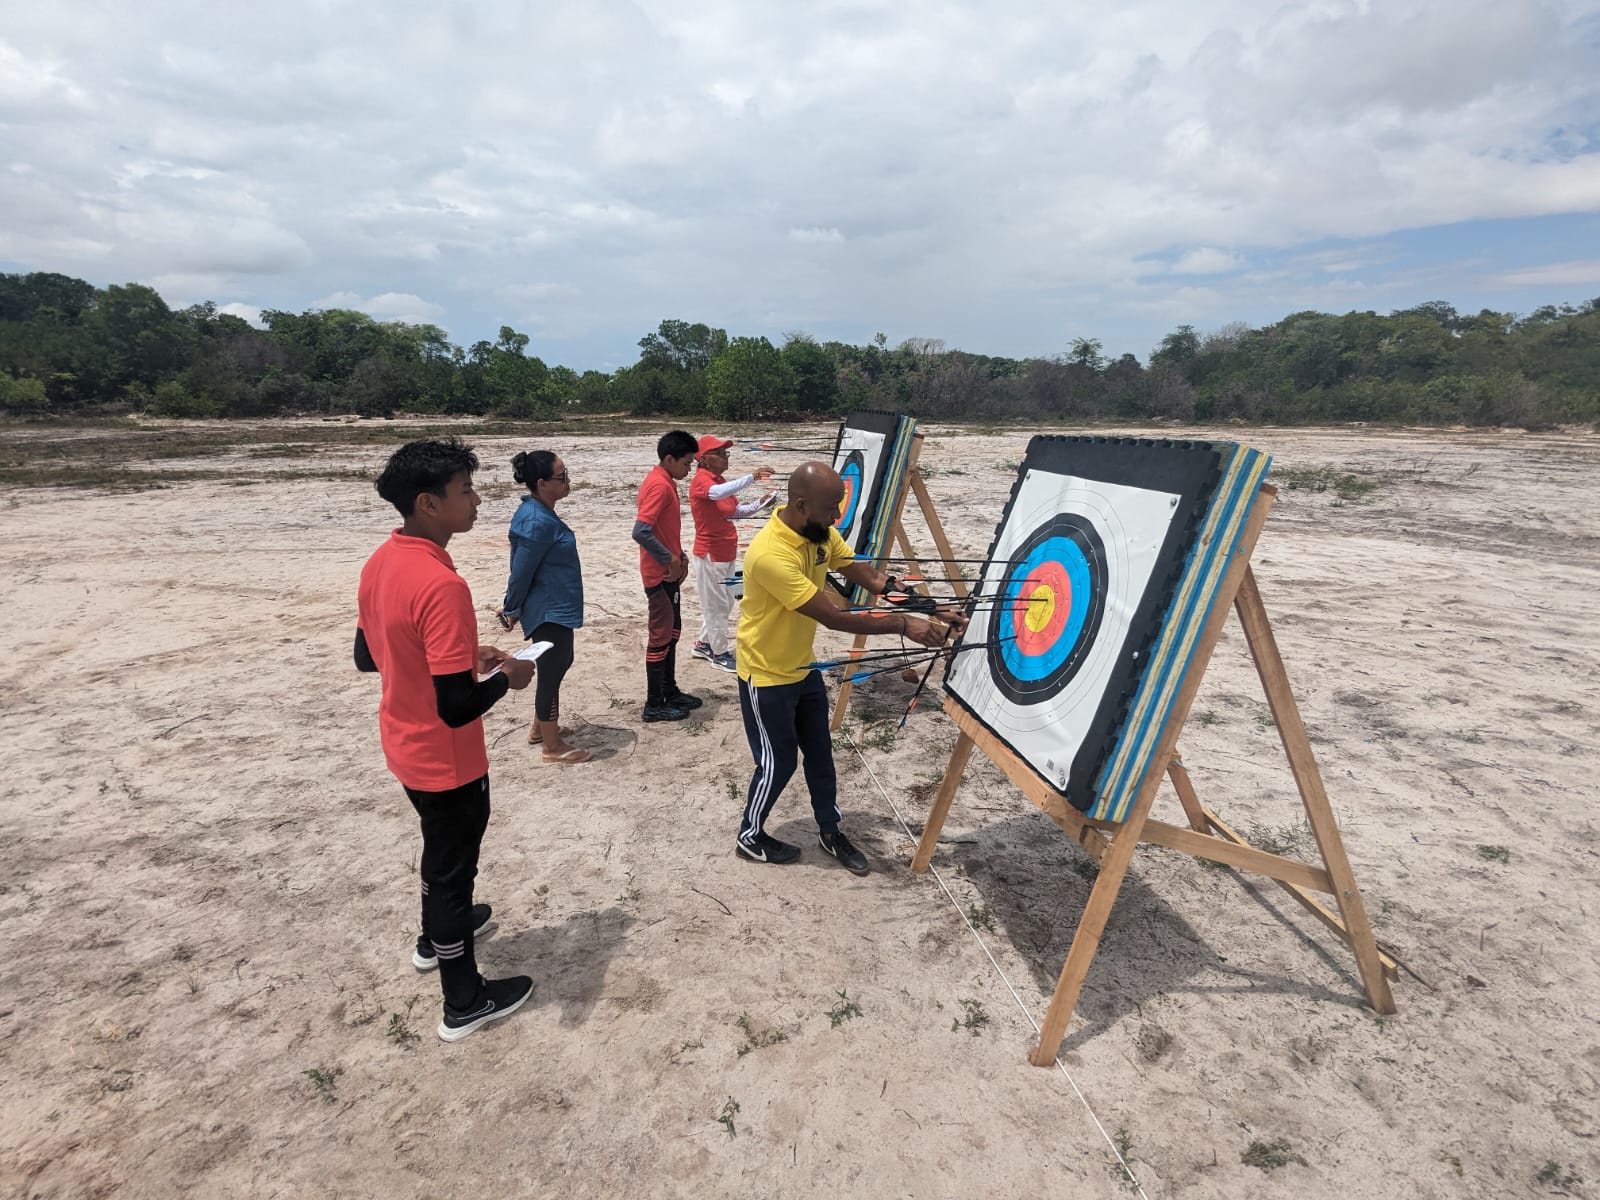 Competitors from ‘DeChief Archery Club’ and 'Essequibo Archers'